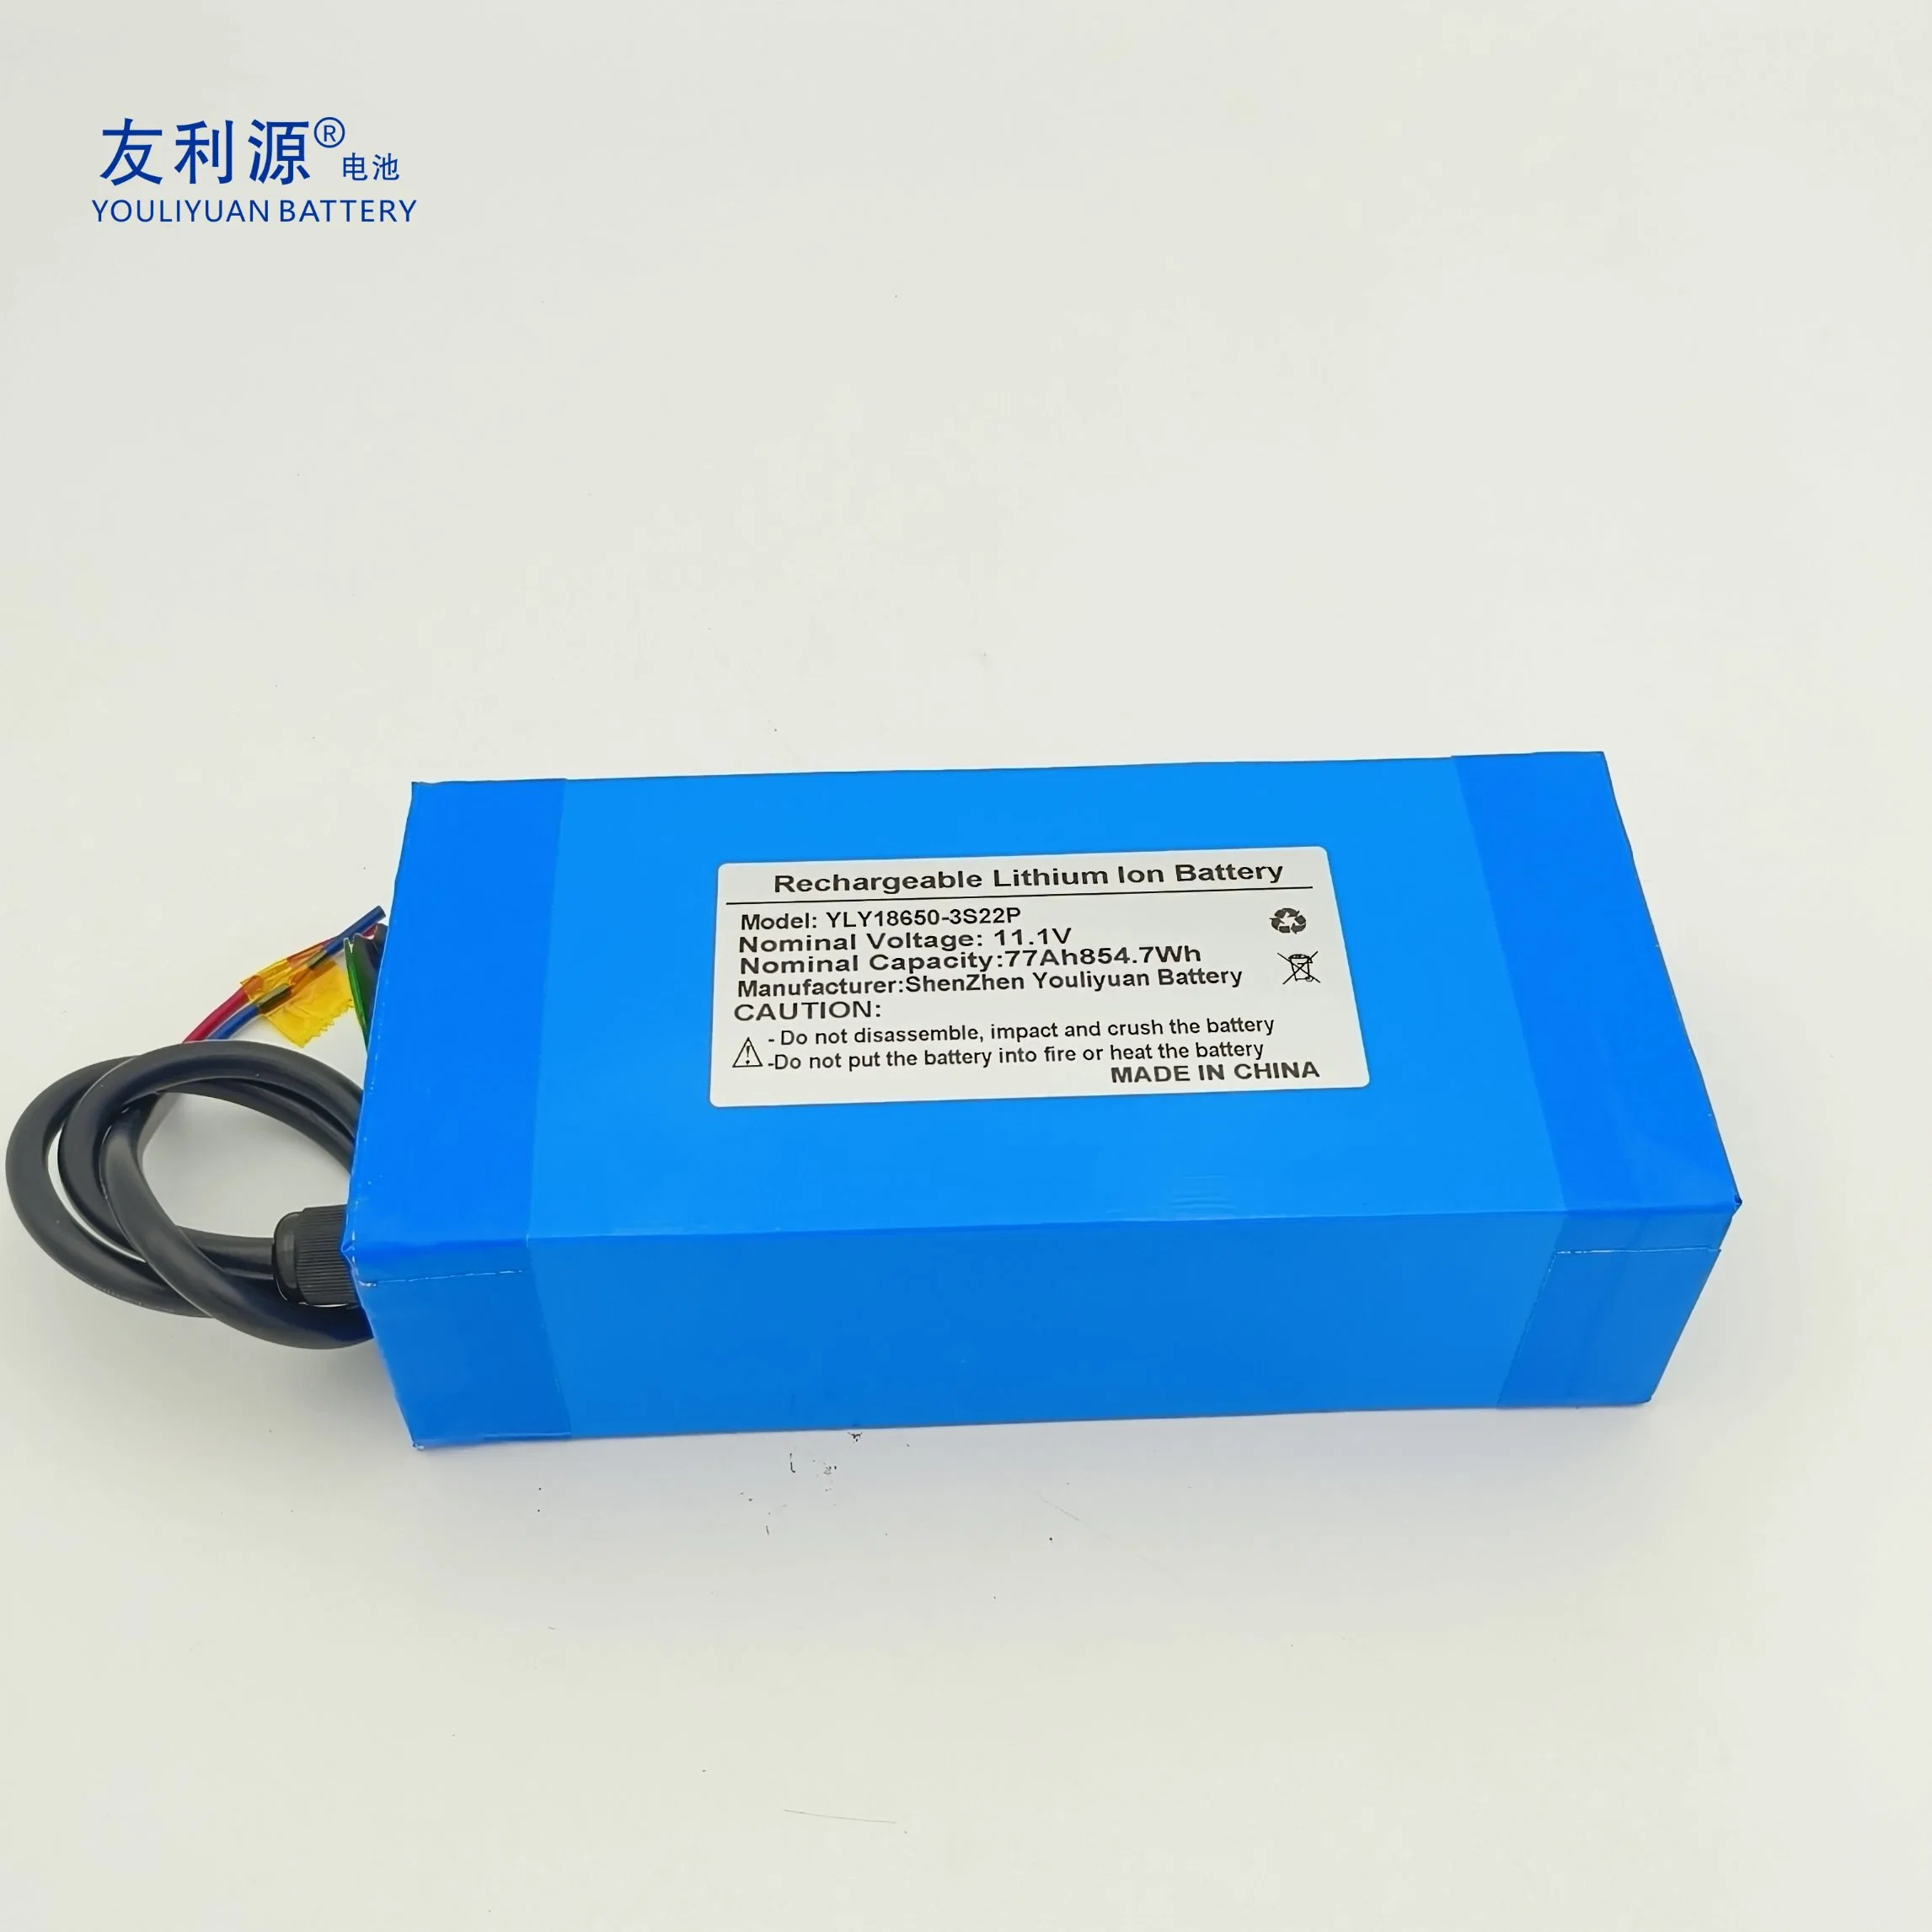 Inquiry About Cylindrical 18650 Battery Packs 3s22p 11.1V 77ah 854.7wh Lithium Ion Battery Deep Cycle/High Capacity Cell for Solar LED Light/RV/Storage System